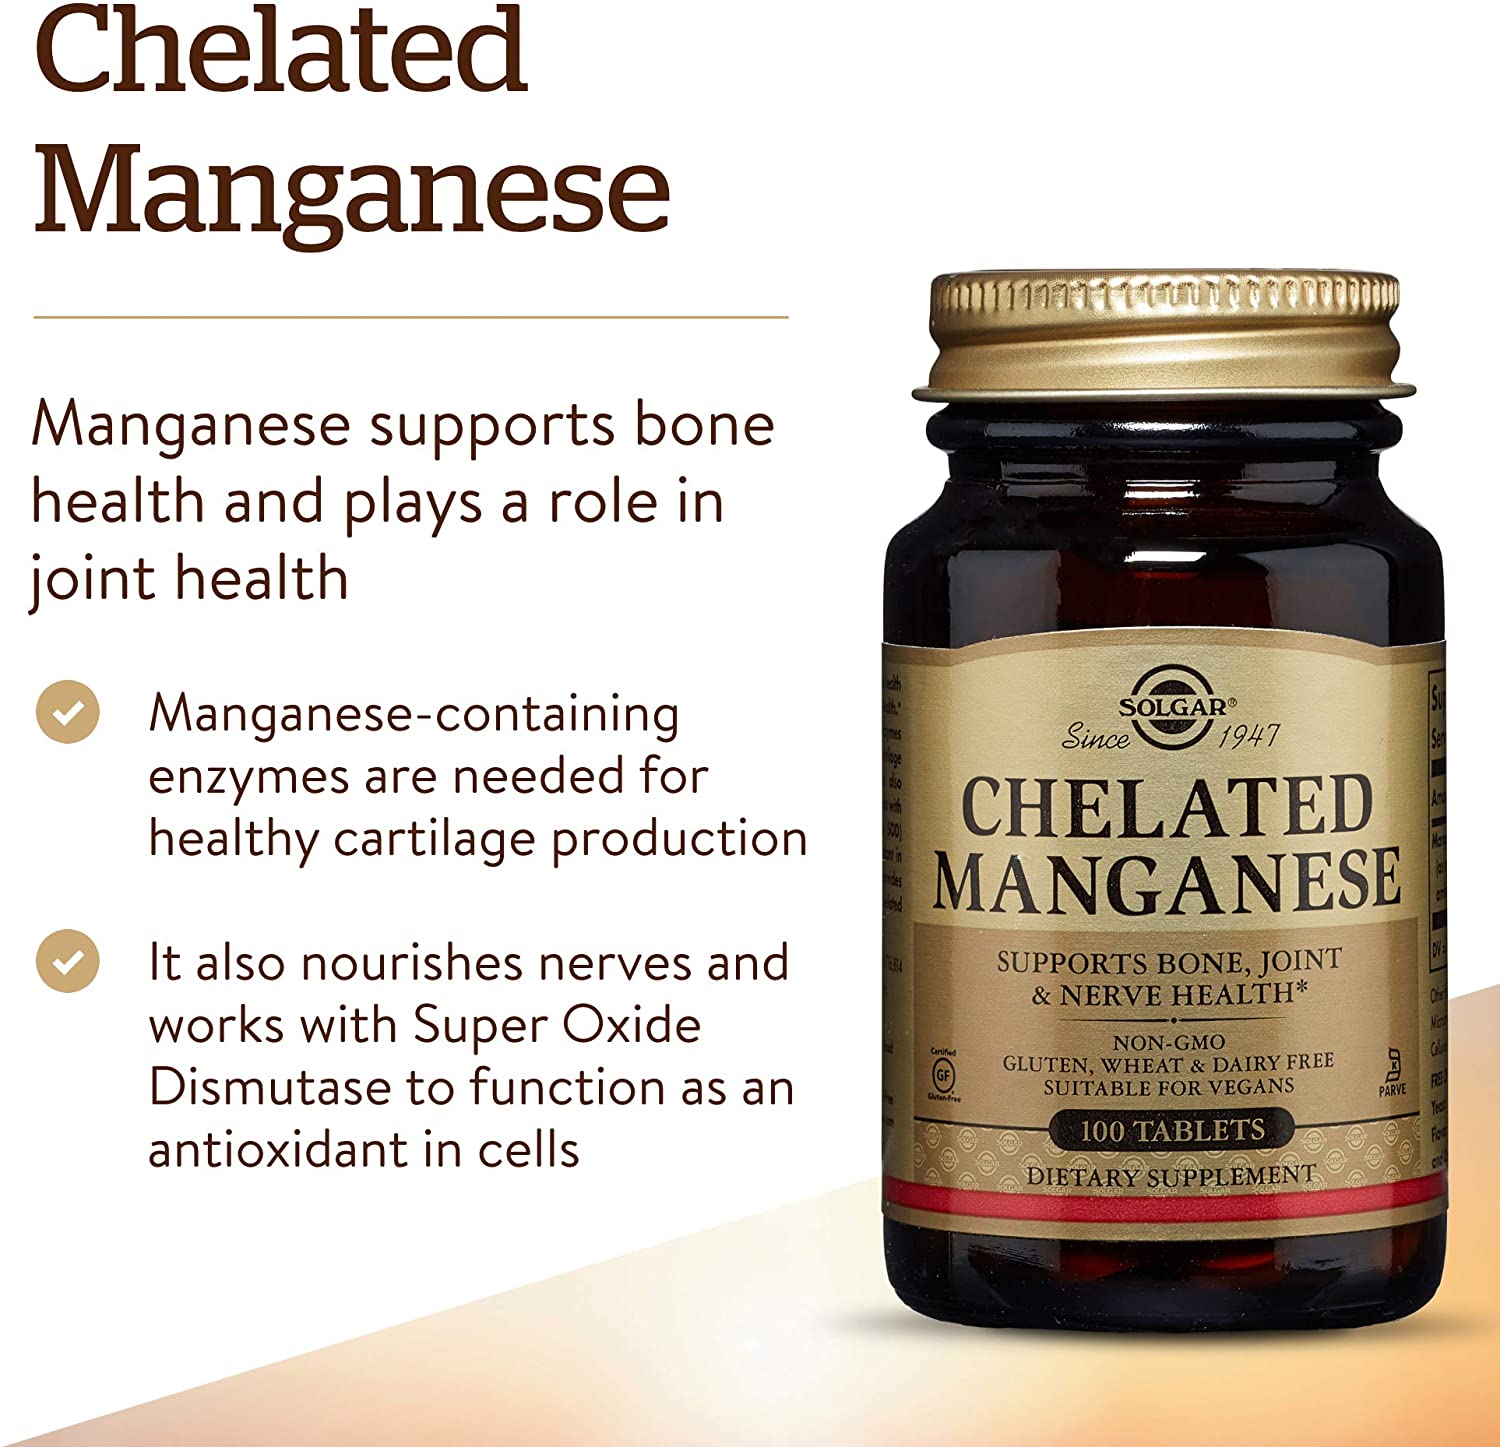 Solgar Chelated Manganese, 100 Tablets Discount Nutrition Store